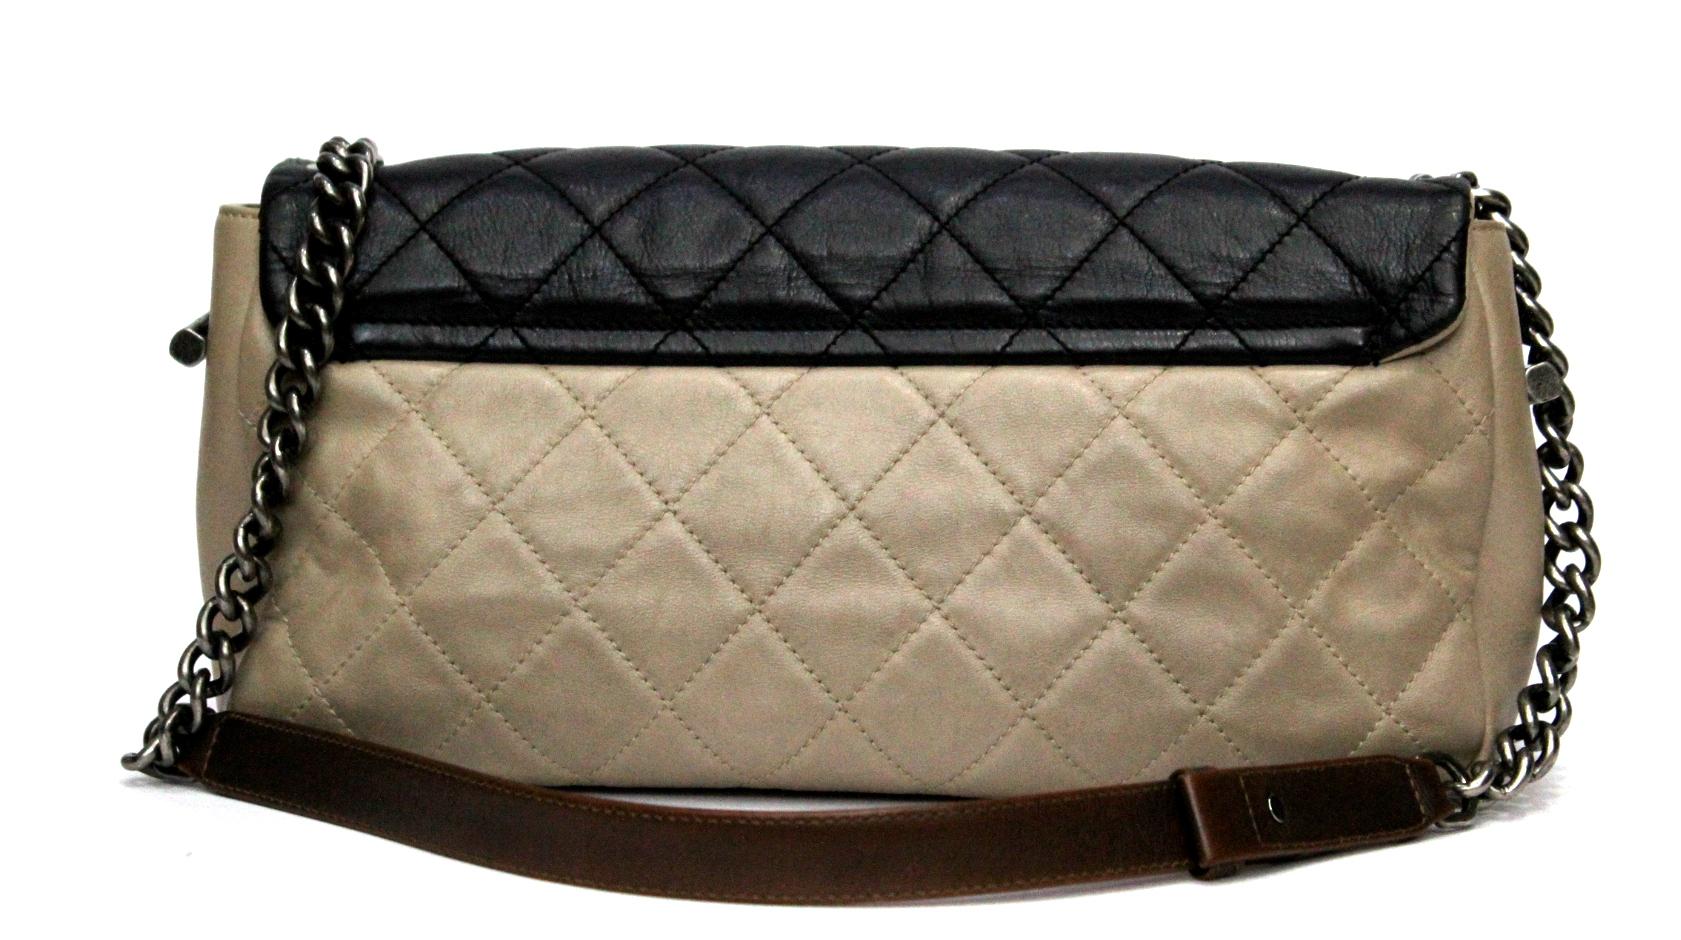 Chanel bag with the classic diamond pattern, made of lambskin. The bag has a small shoulder strap made of antique silver metal and dark brown leather that recalls the color of the flap. The shoulder strap can also be removed, turning the bag into a